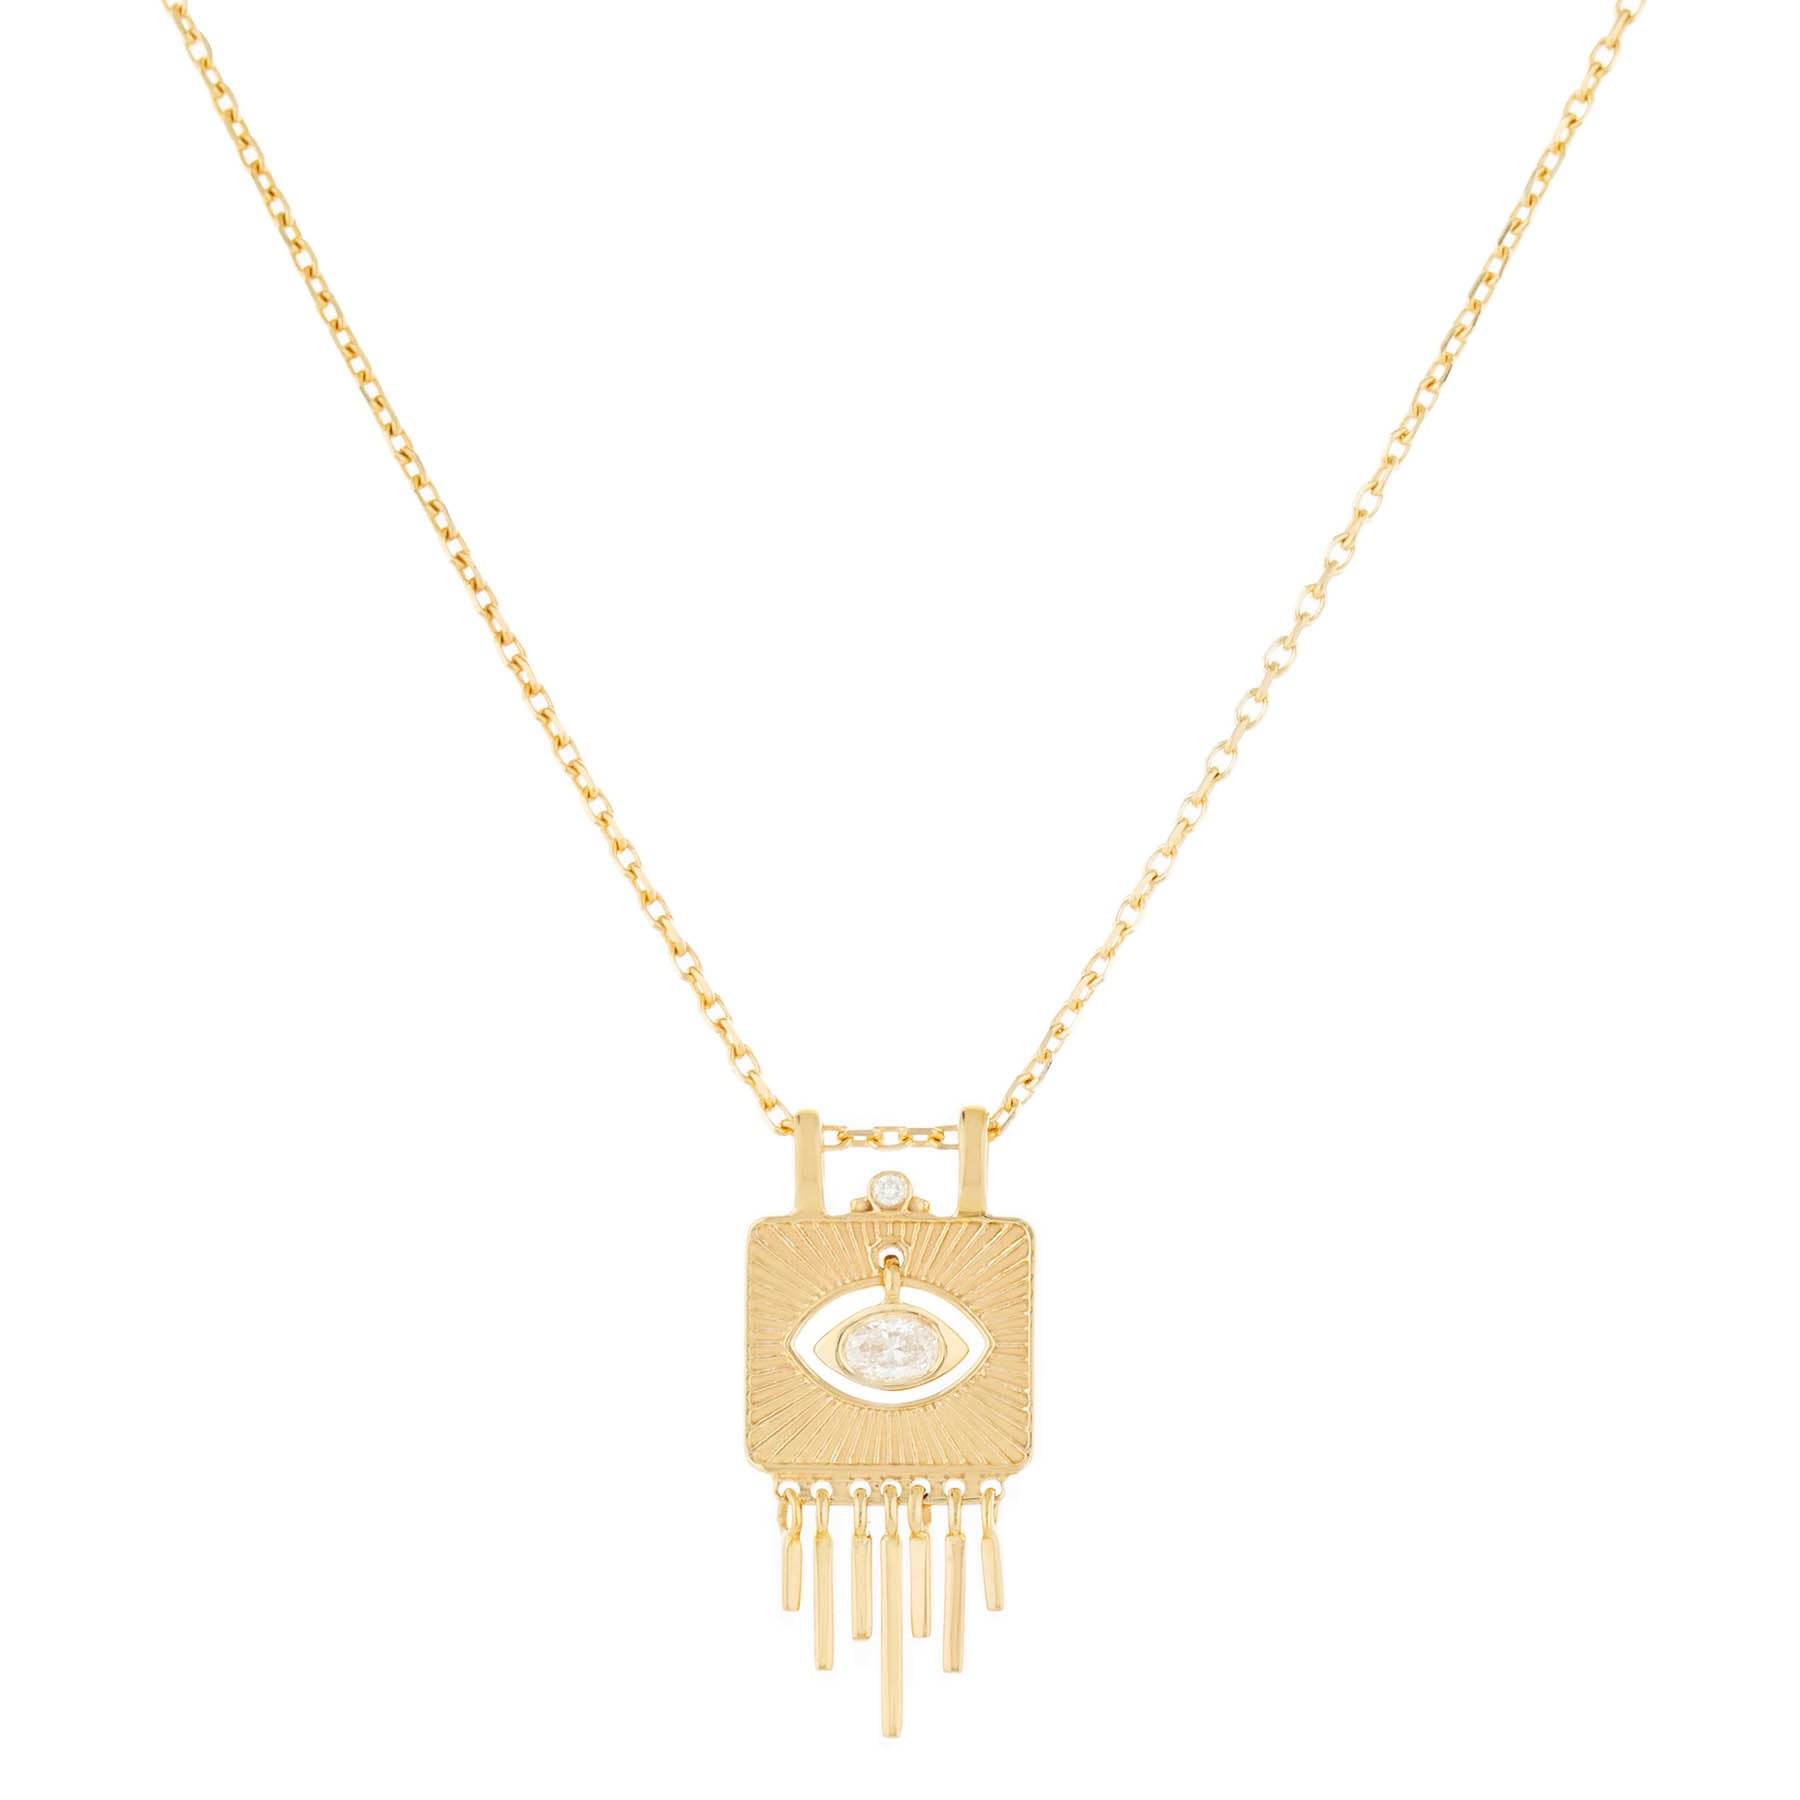 Solid Gold Plate with Sunbeams & Dangling Diamond Eye Chain Necklace